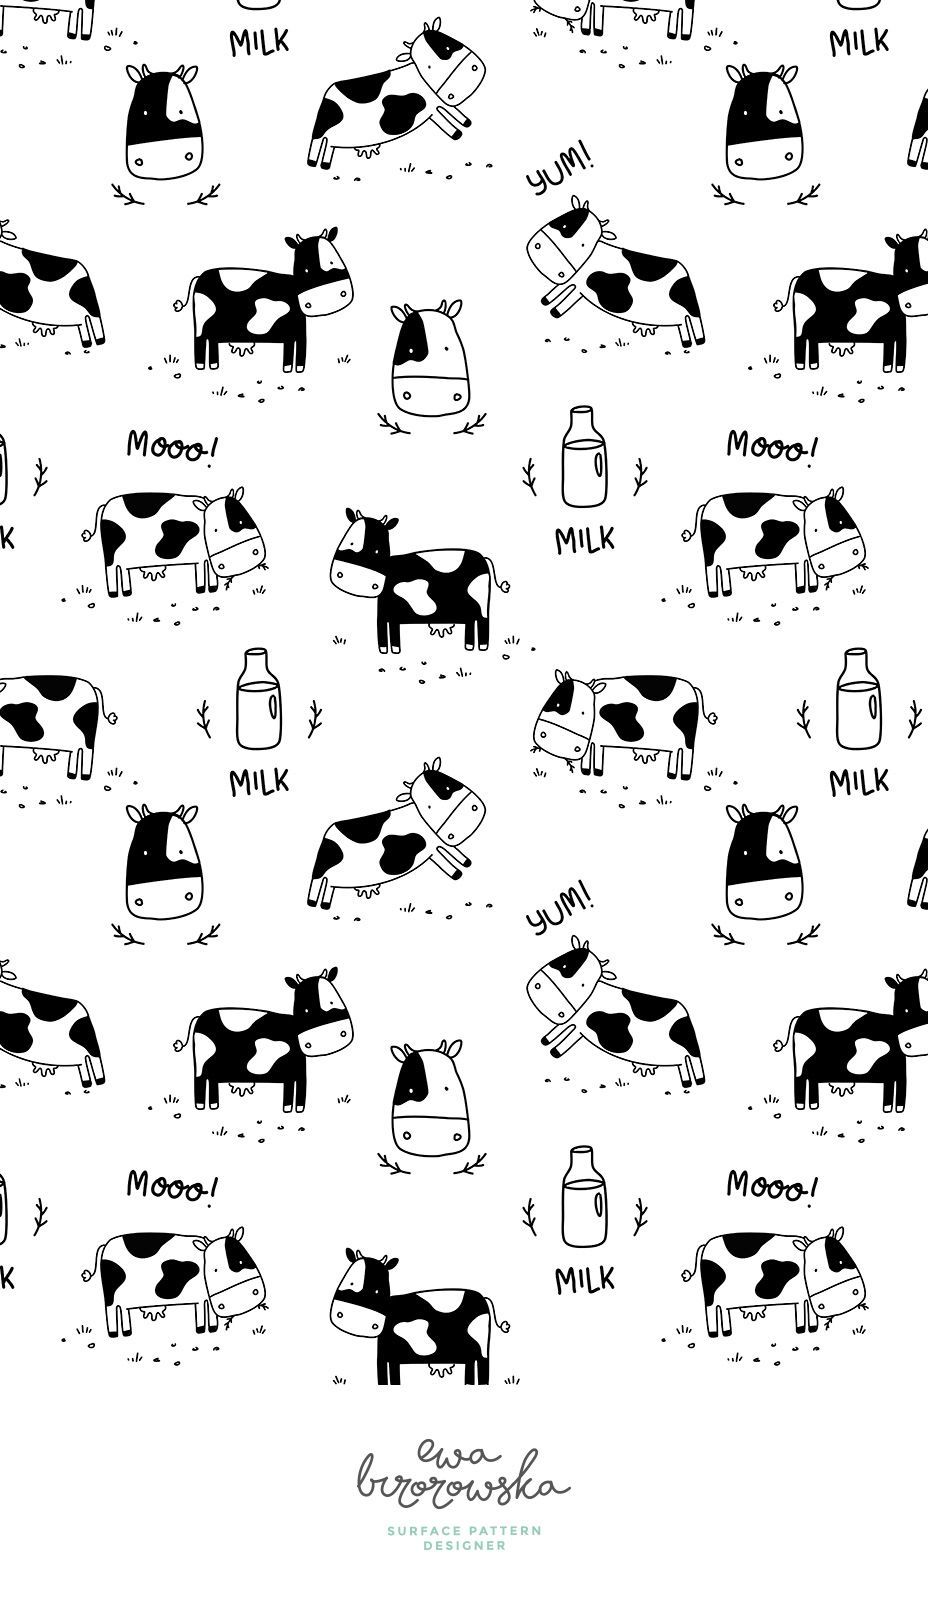 Minimal black and white cow pattern design in scandinavian style with some lettering. Cow tattoo, Cow illustration, Cow wallpaper